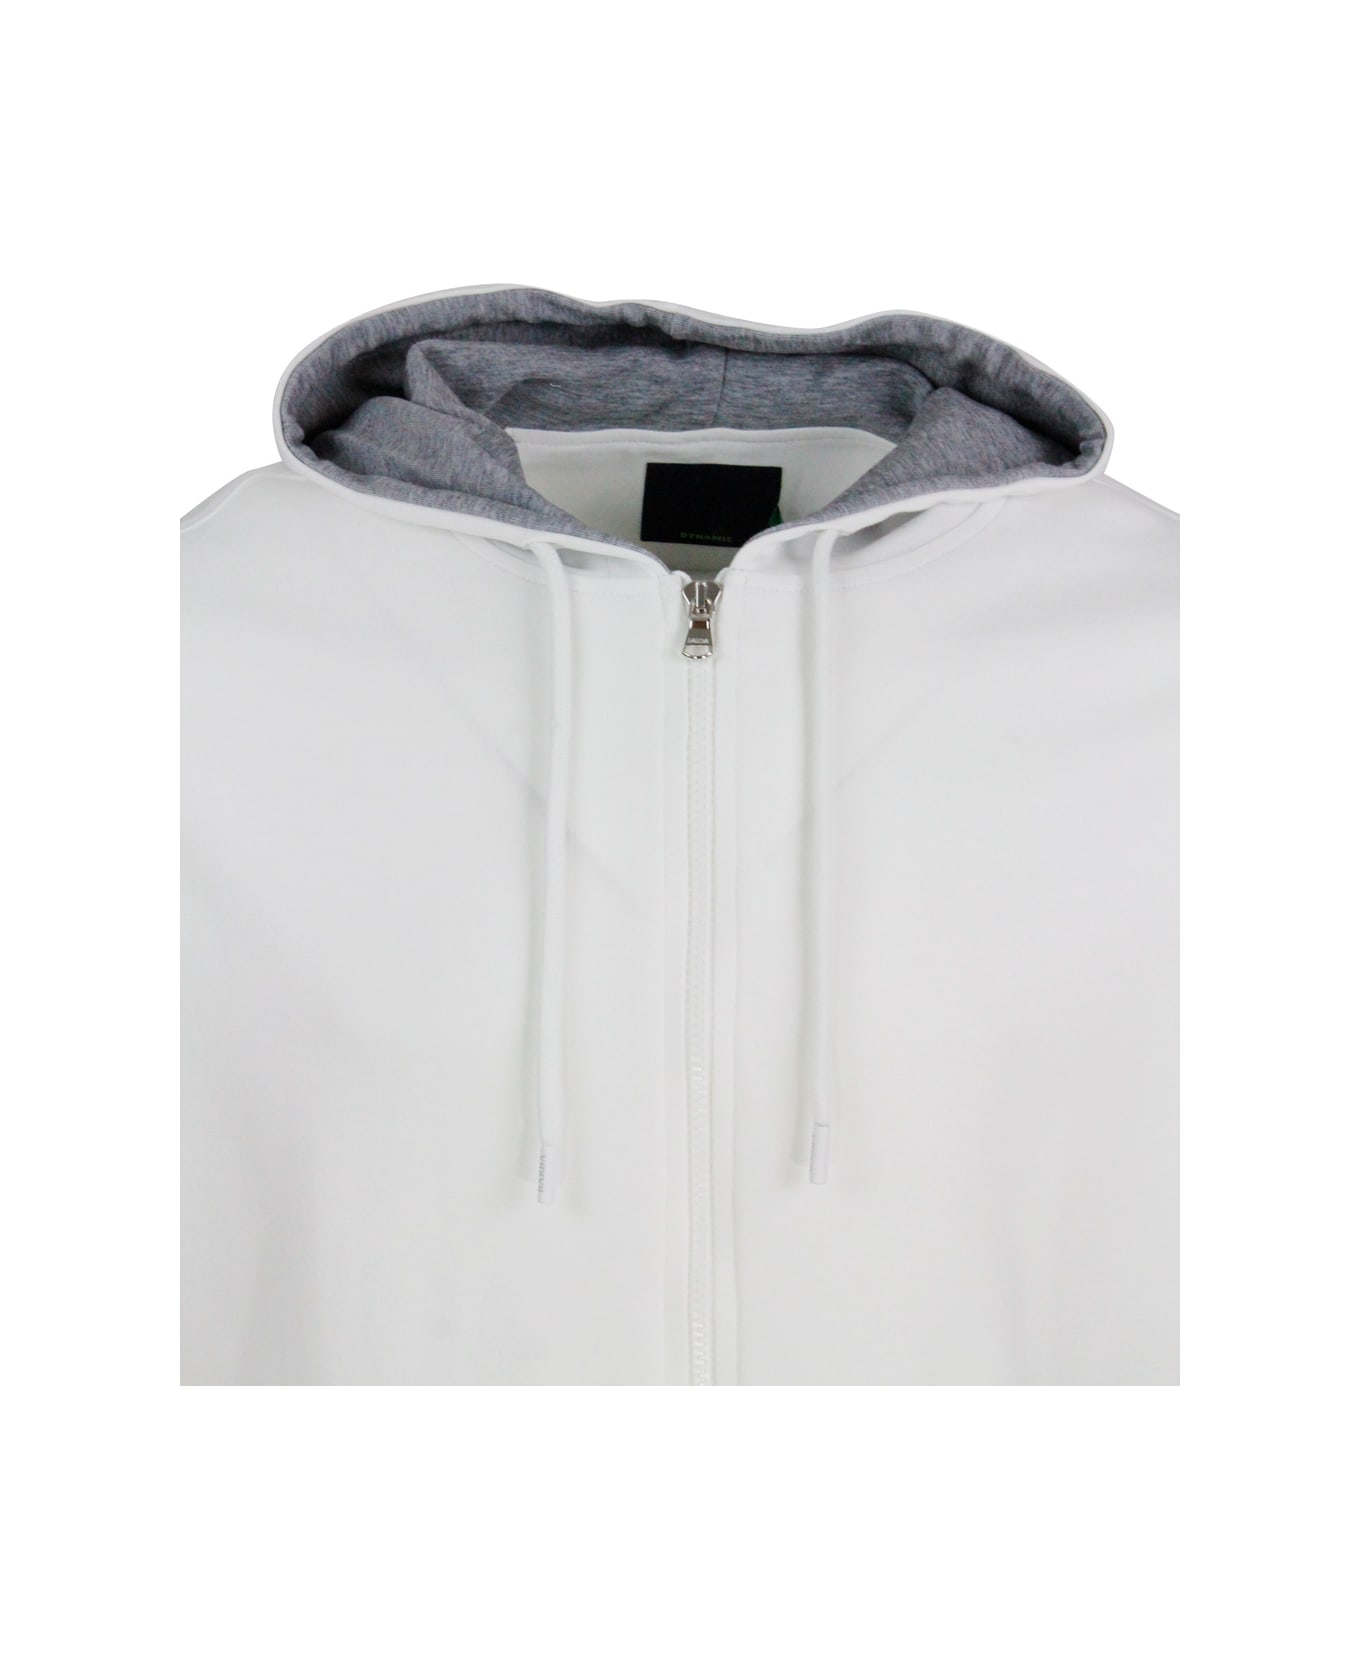 Barba Napoli Lightweight Stretch Cotton Sweatshirt With Hood With Contrasting Color Interior And Zip Closure - White